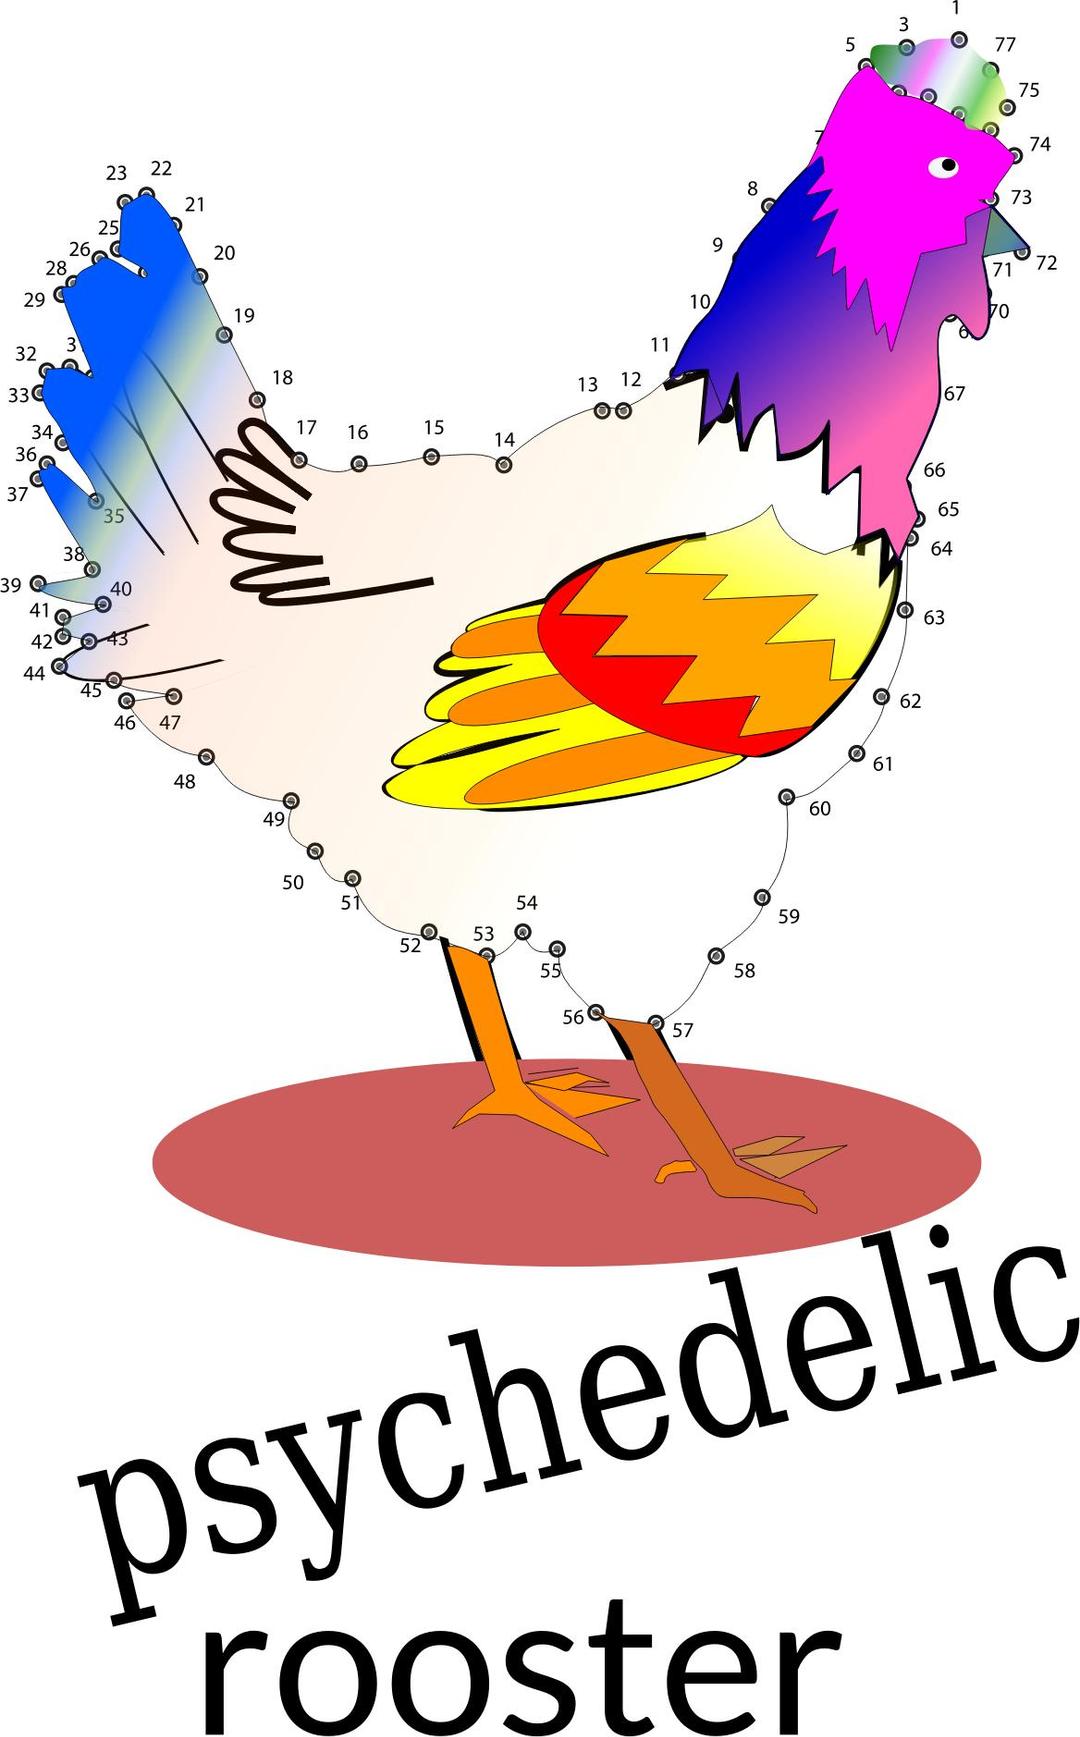 Psychedelyc rooster png transparent